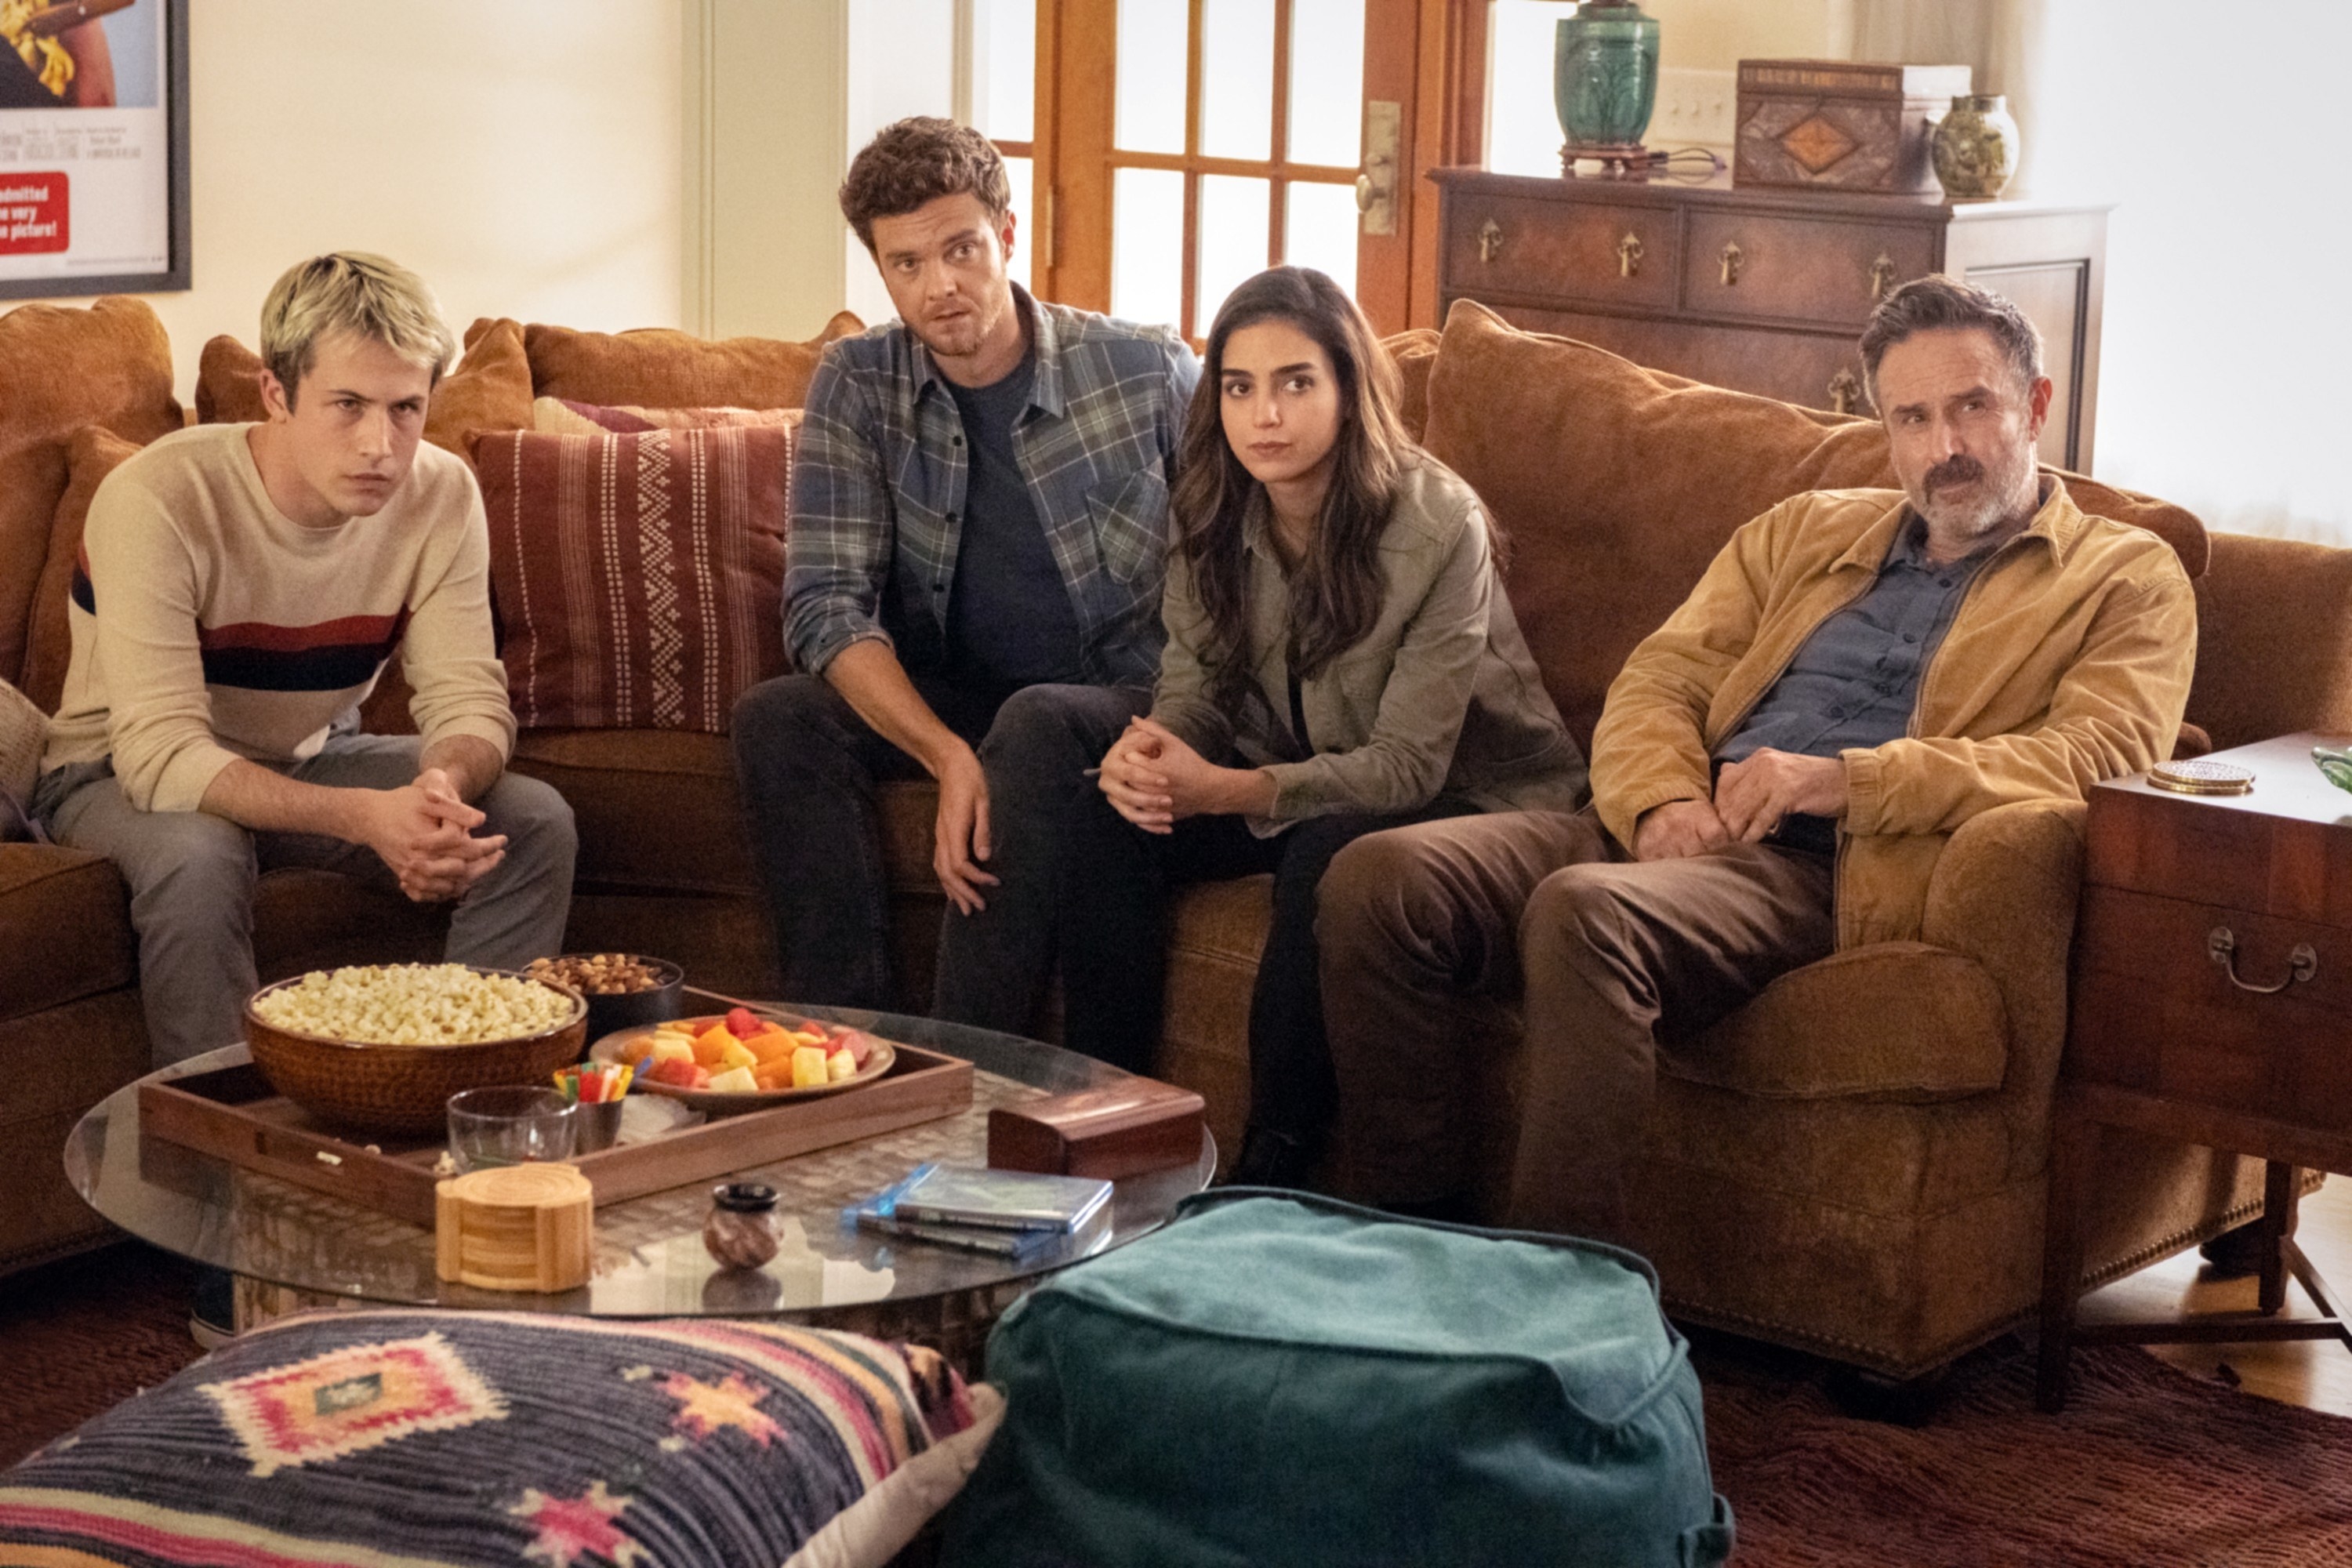 Dylan&#x27;s character sitting with David Arquette and others in a living room in a scene from Scream